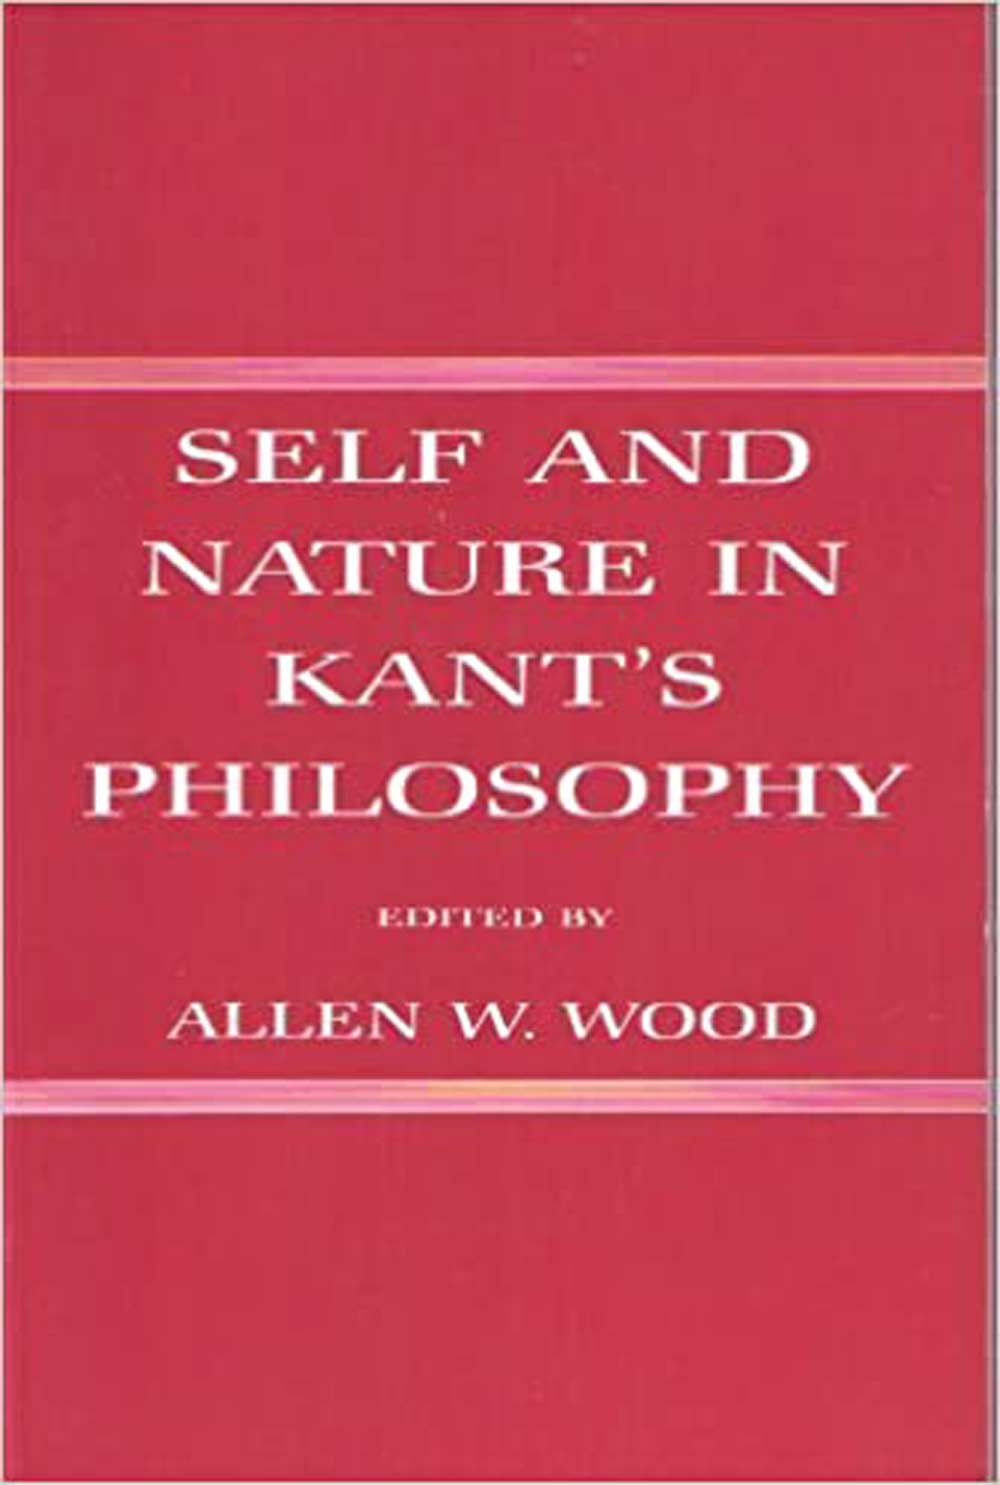 Self and Nature in Kant's Philosophy